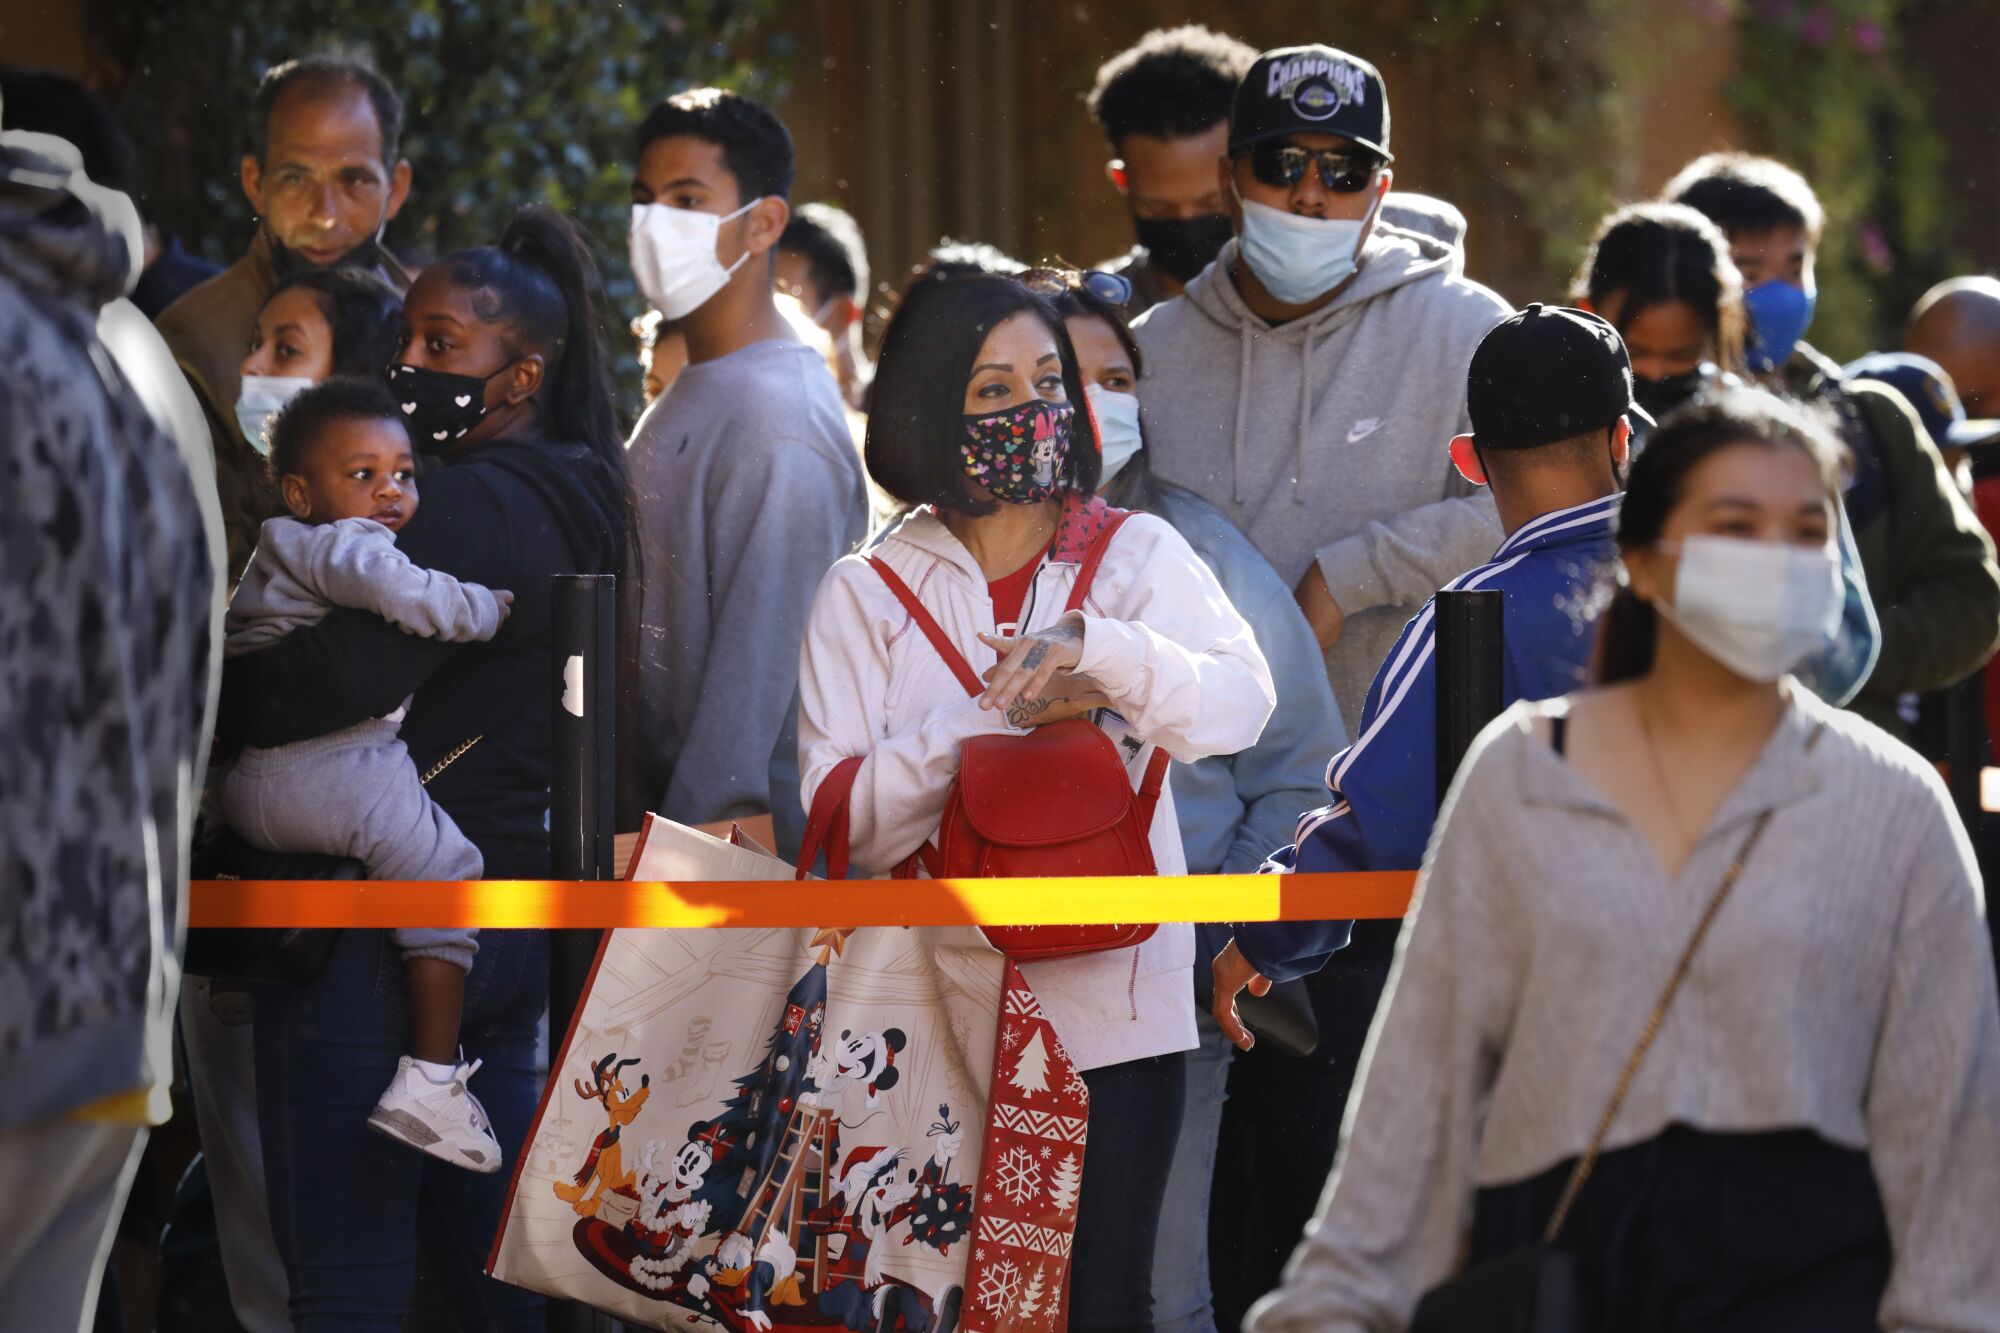 Jacquelin Reyes, of Los Angeles, (with red bag) waits in line at the Nike Store at Citadel Outlets in Los Angeles. 